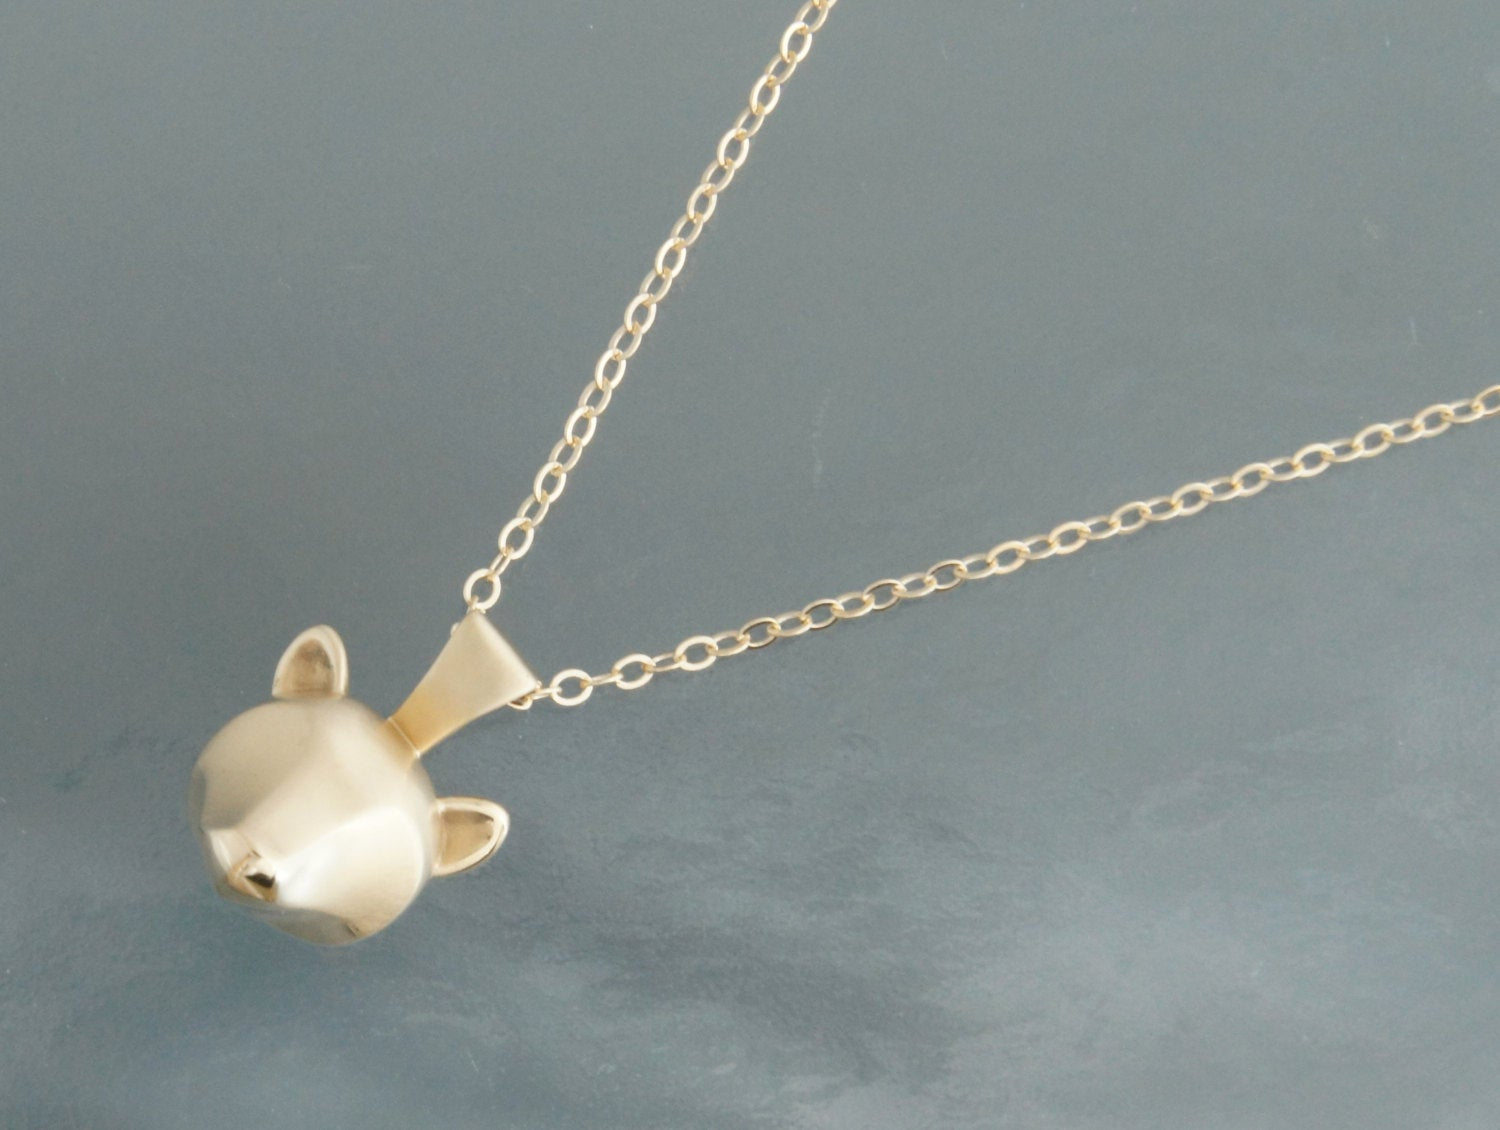 18K Gold BEAR Charm Pendant Solid Crystal Bear Animal Necklace Choker  Necklace Hoop Earring Teddy Bear Necklace Waterproof Necklace - Etsy |  Expensive jewelry luxury, Jewelry collection, Bear necklace